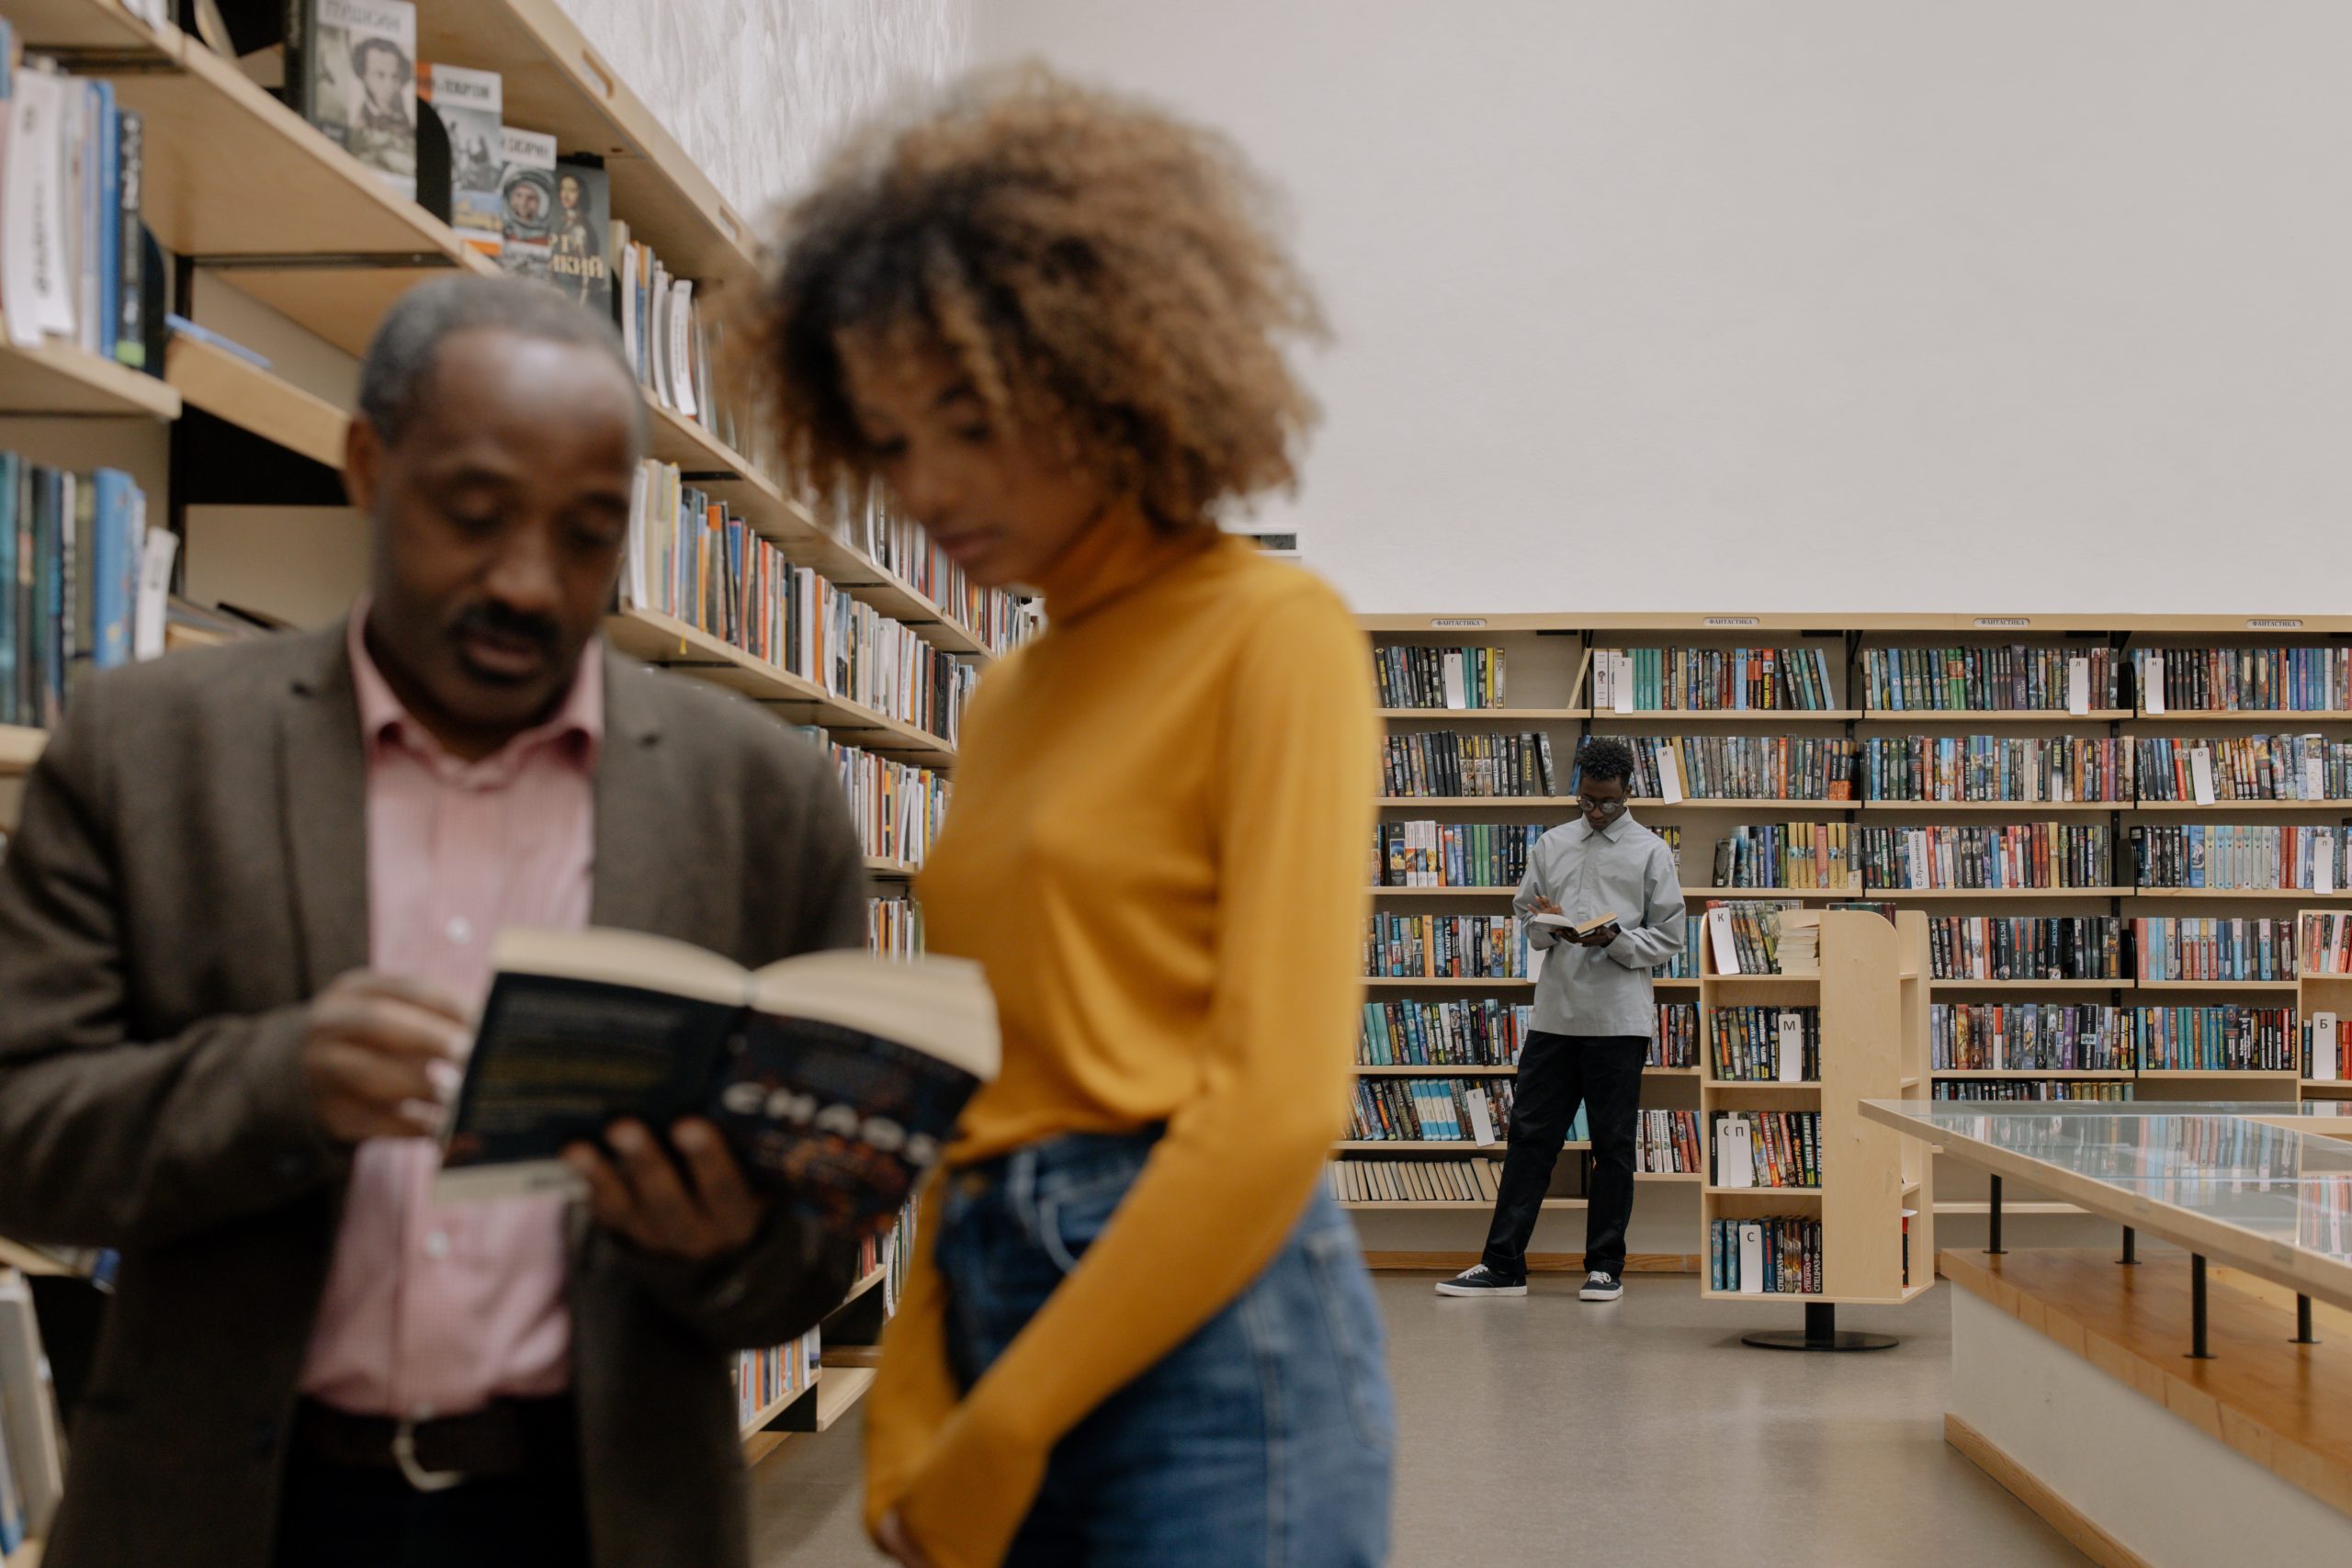 Older black man and younger black woman read a book in a library. They are slightly out of focus.